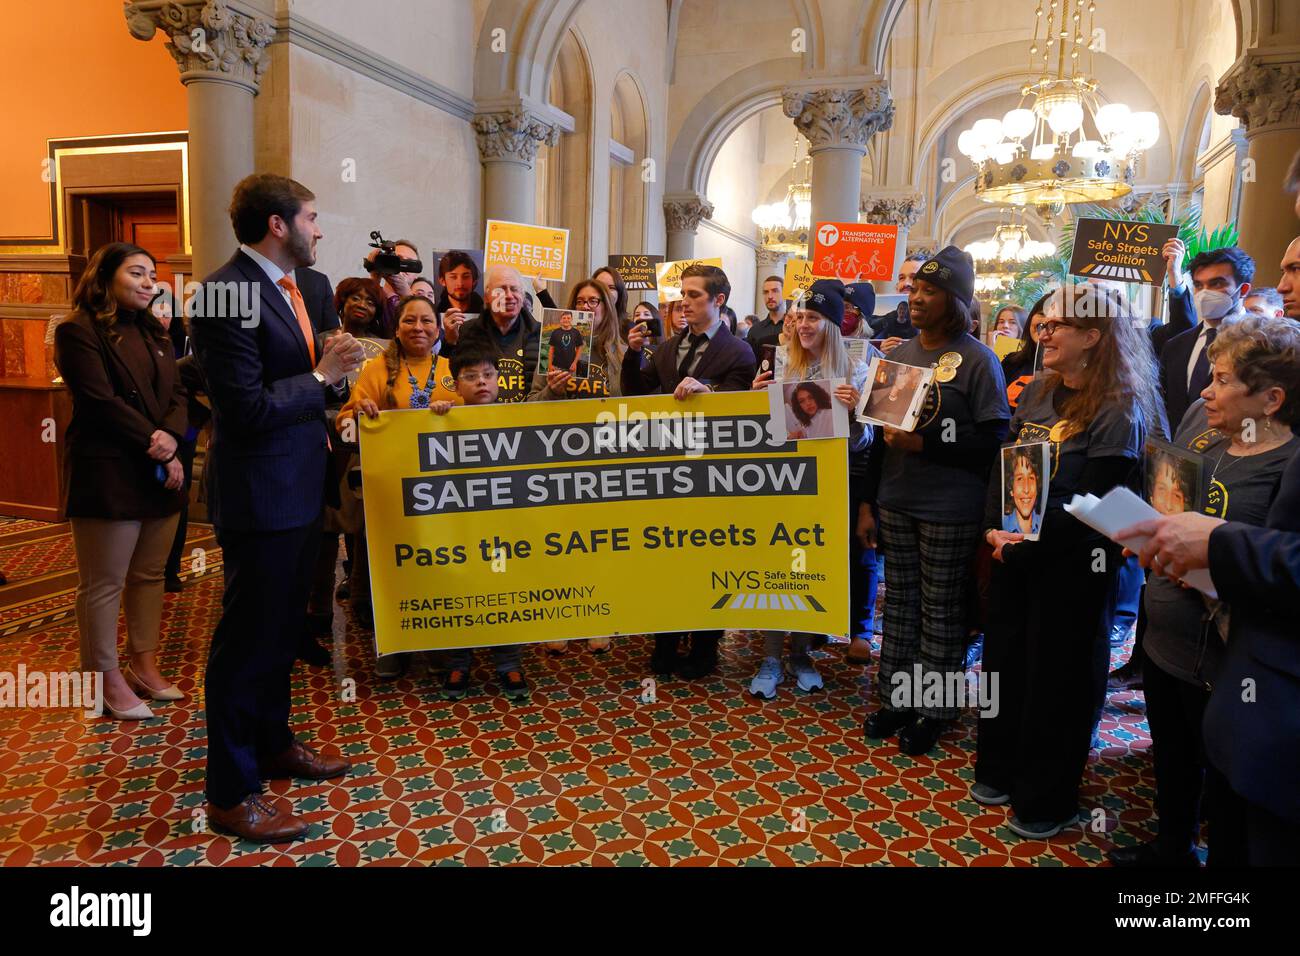 January 24, 2023, Albany, New York. NY Senator Andrew Gounardes (left), and NY Senator Kristen Gonzalez (left) among lawmakers and safe street activists, including Families for Safe Streets, at the New York State Capitol building holding a press conference advocating for the passage of the SAFE Streets Act, a package of bills to redesign streets to be safer for all users. The SAFE Streets Act include Sammy's Law, Complete Streets, and the Crash Victim Bill of Rights. Governor Hochul has signaled support for Sammy's Law allowing NYC to set speed limits below 25mph Stock Photo